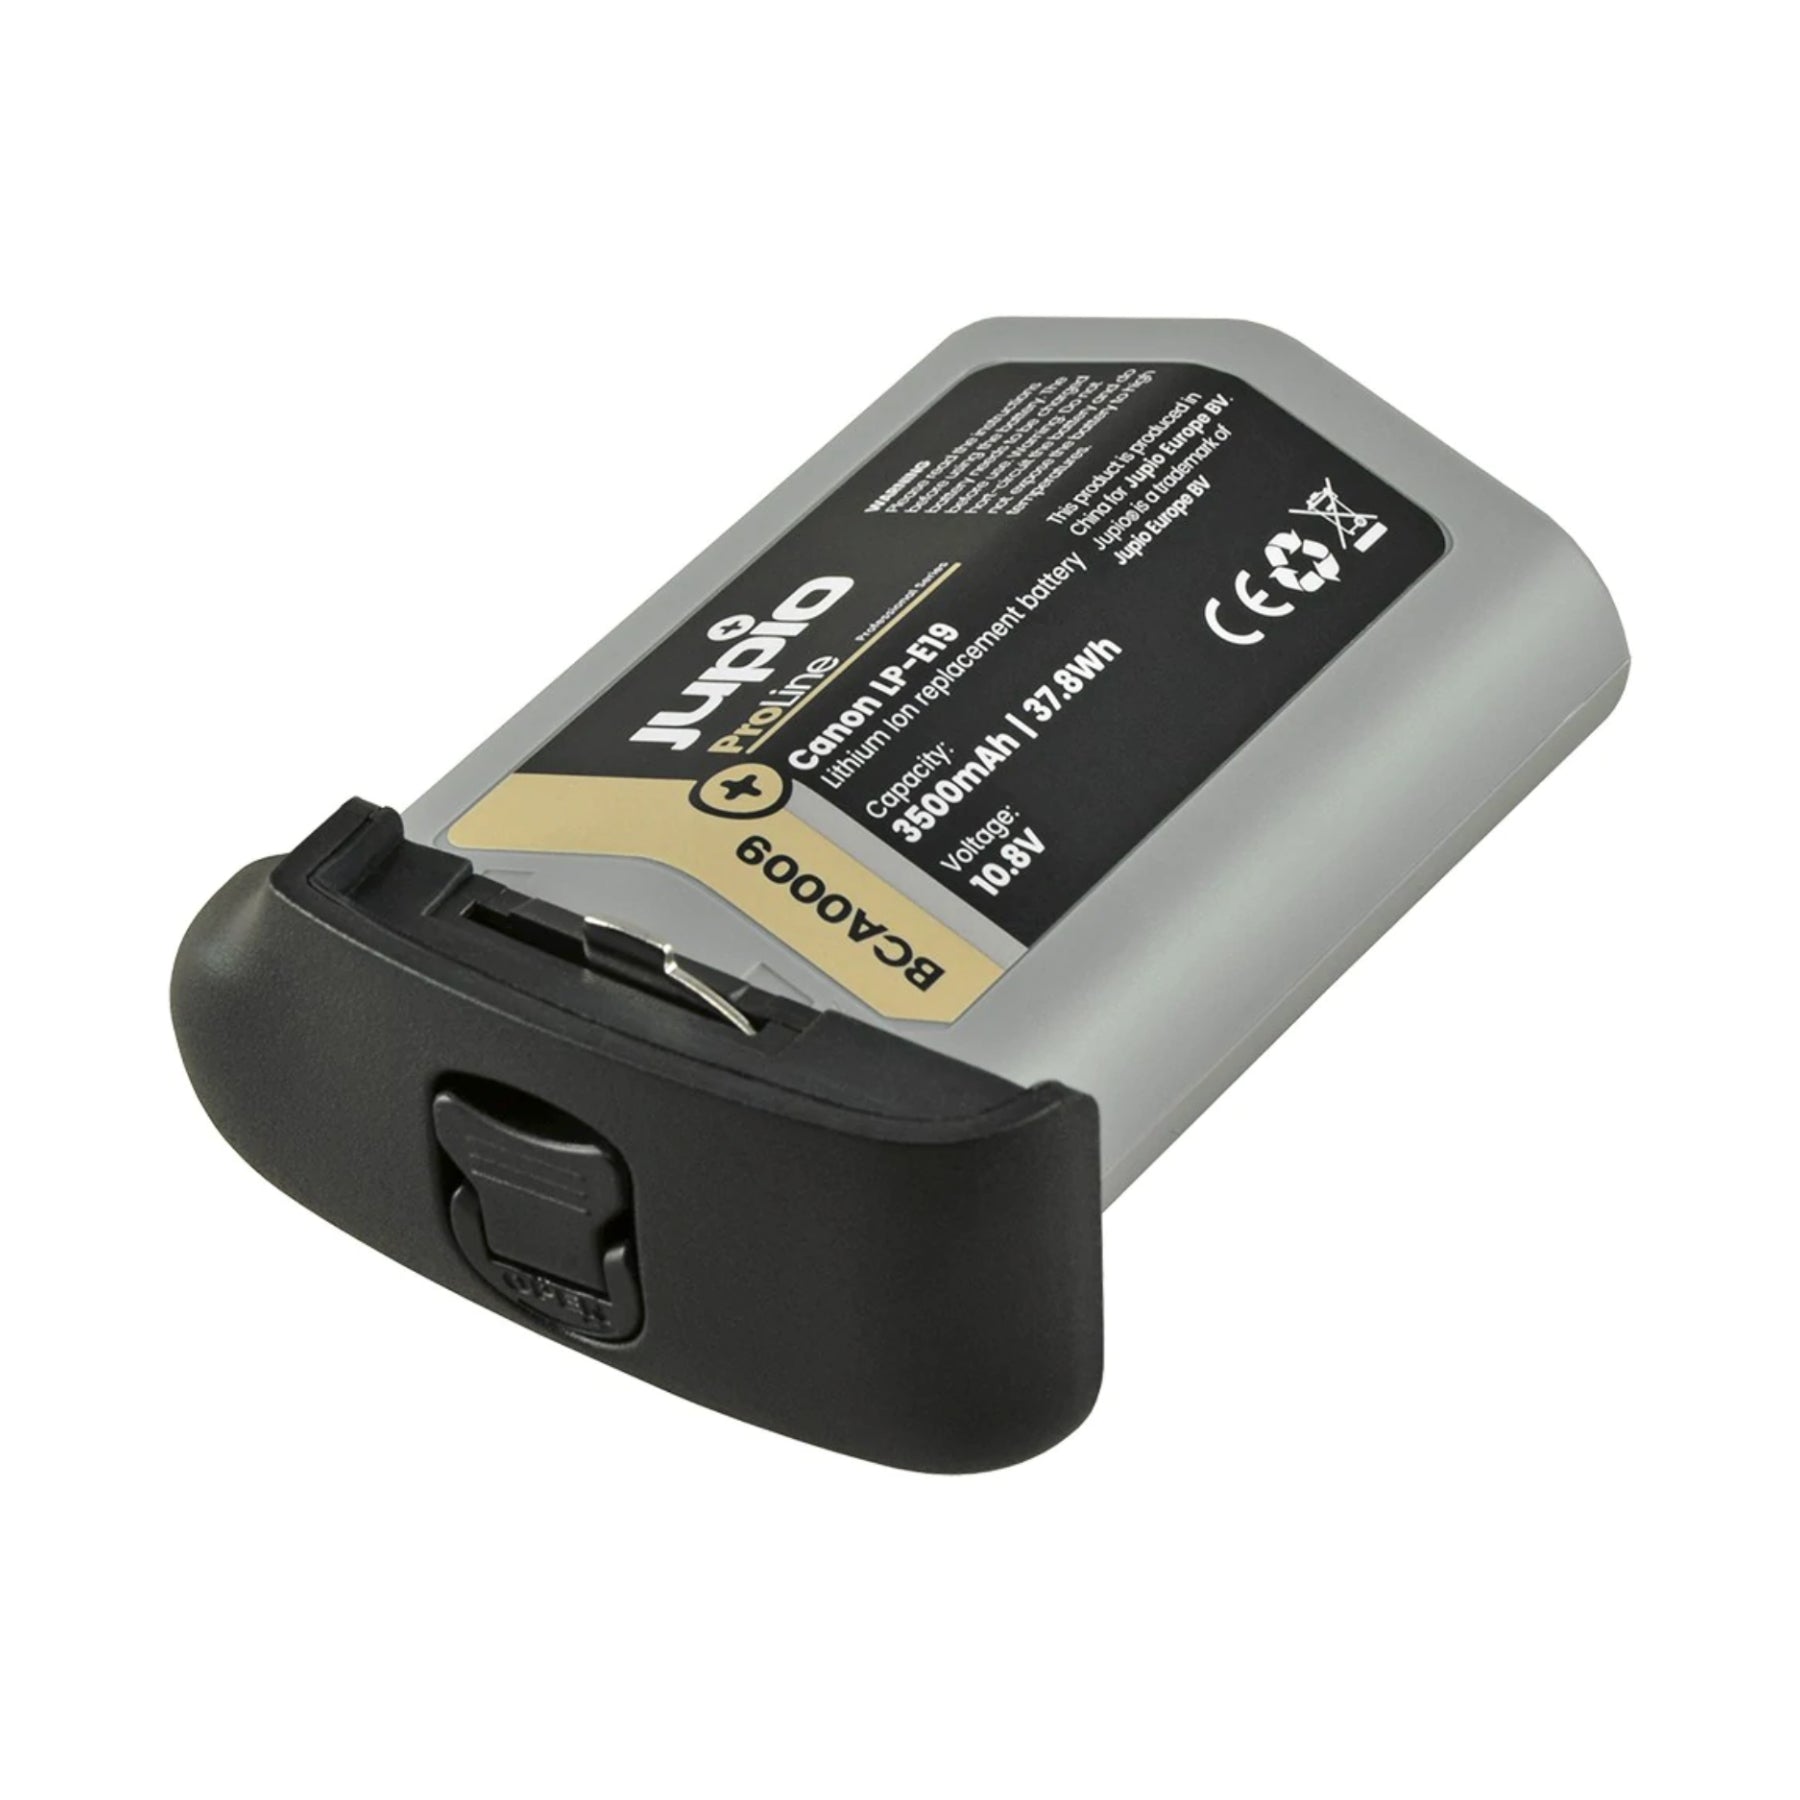 Buy Jupio LP-E19 Lithium-Ion Battery Pack - For Canon at Topic Store